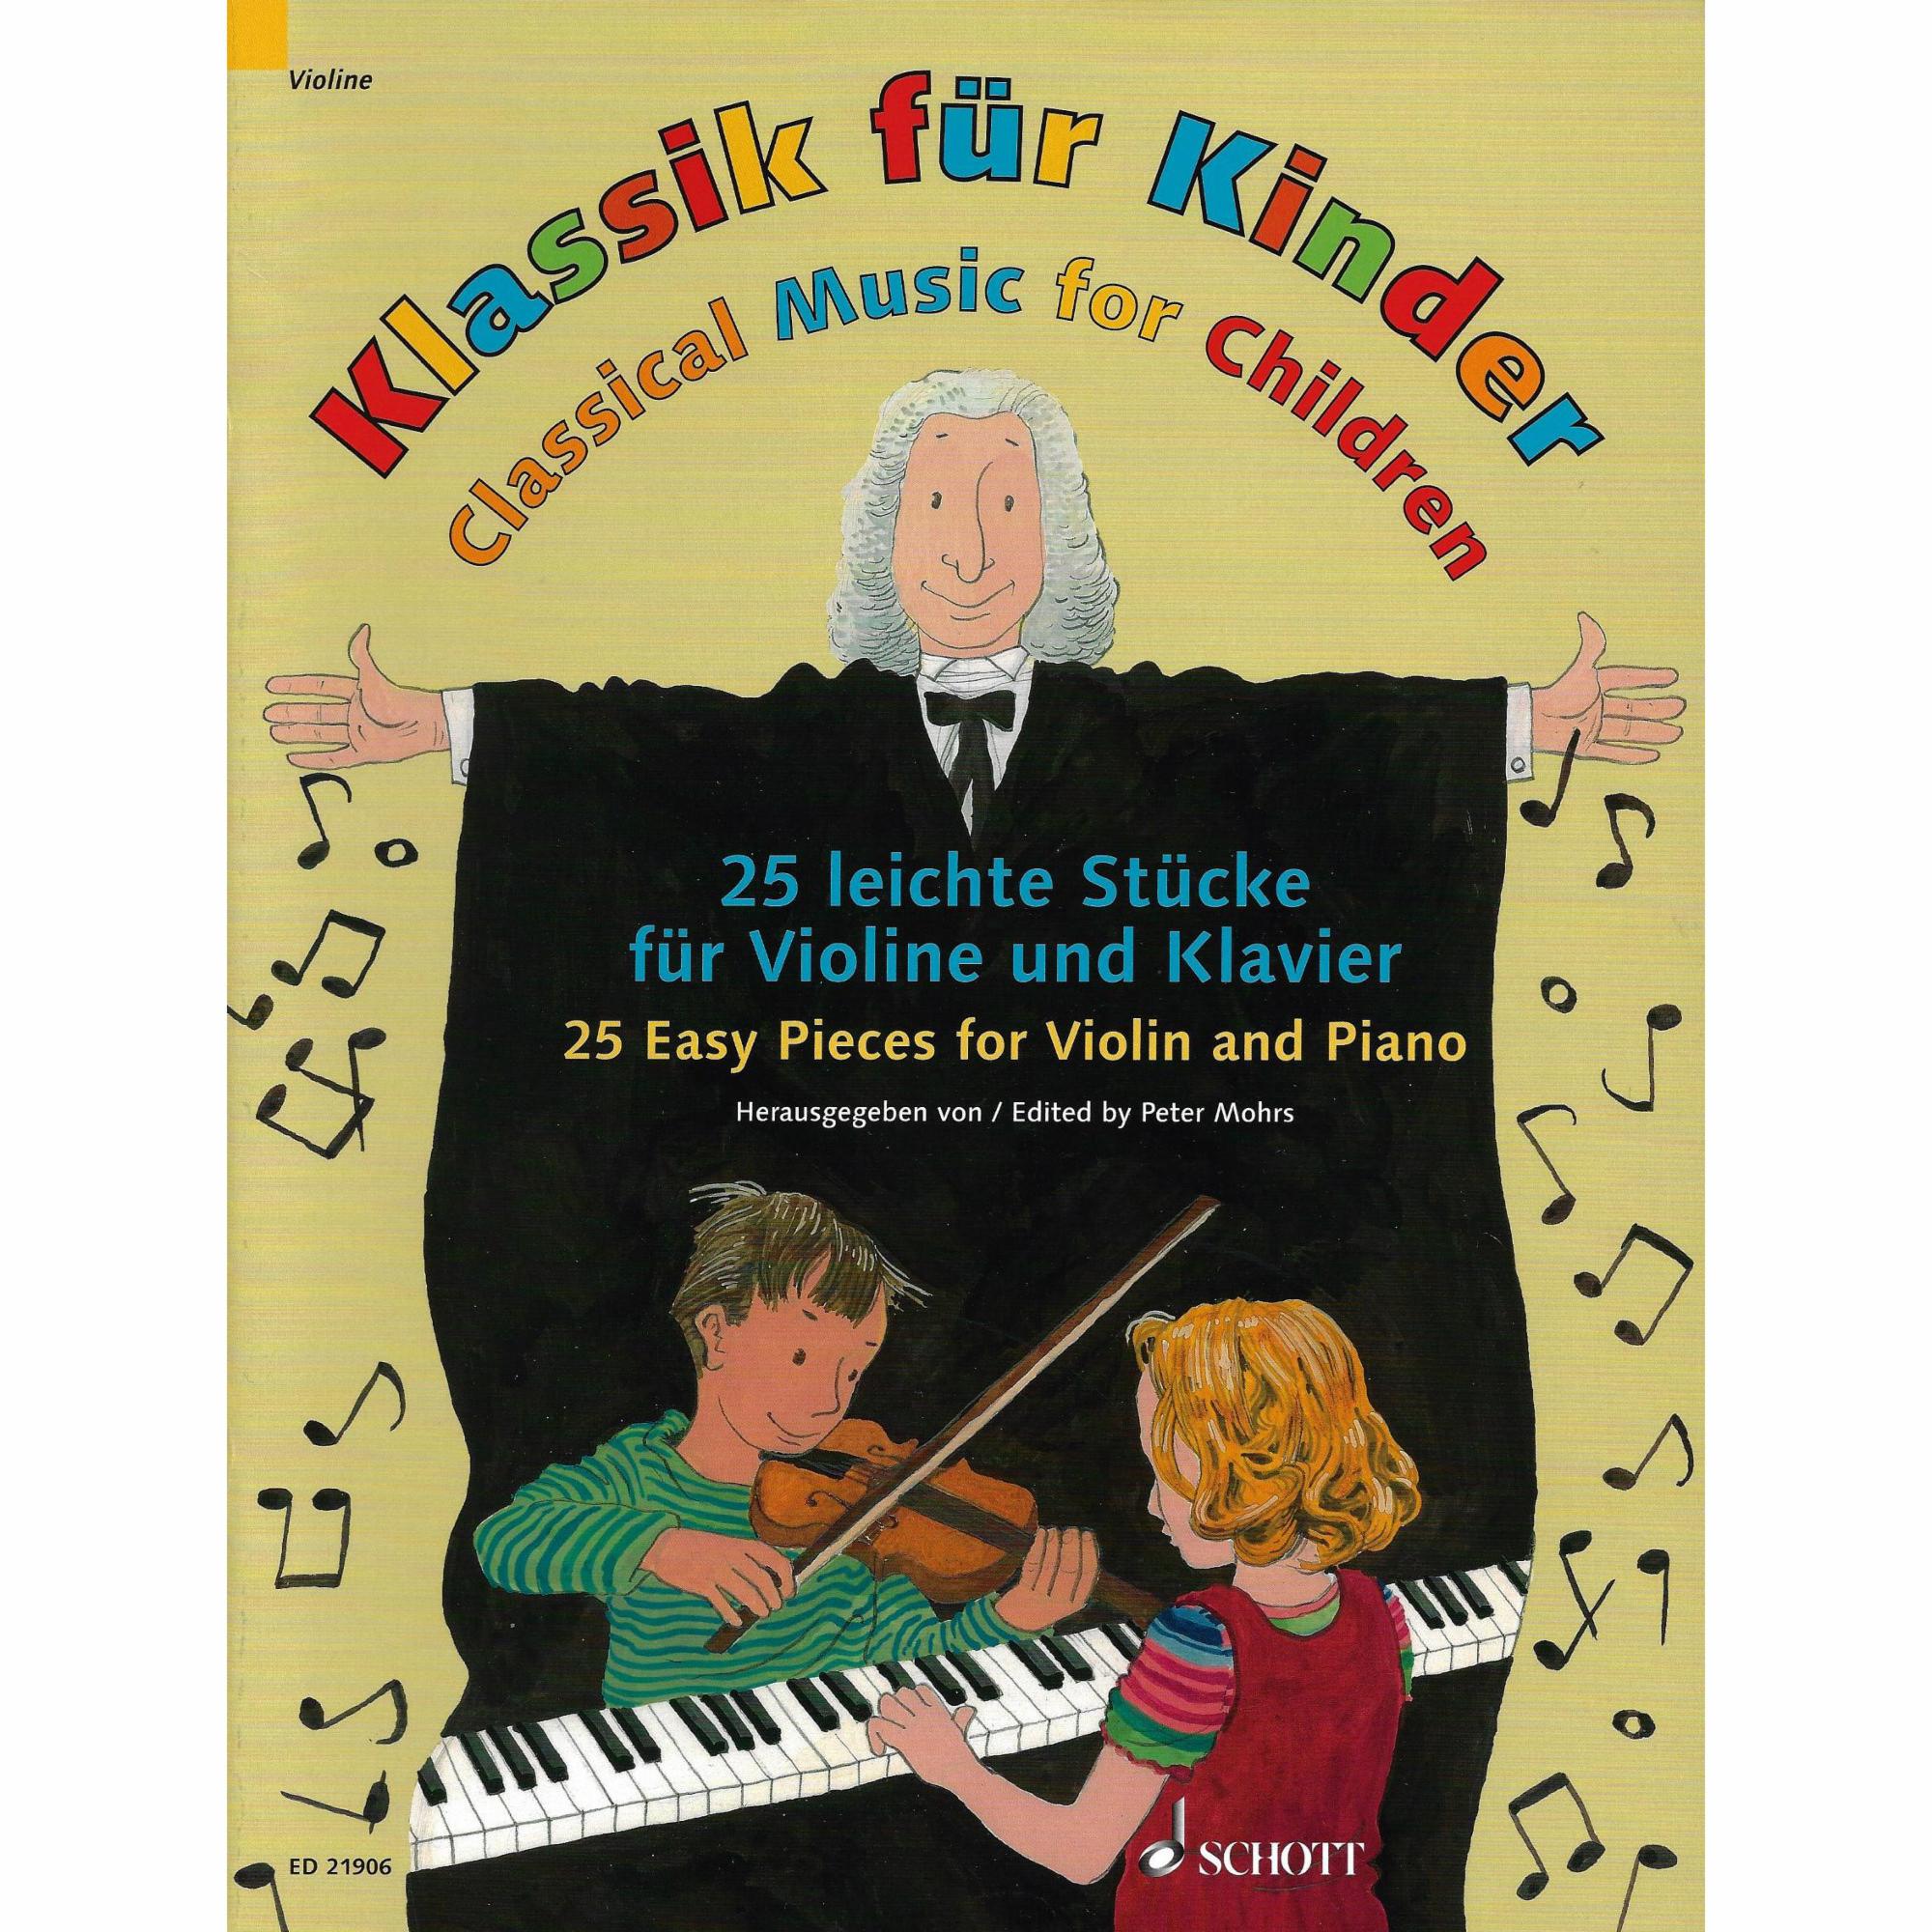 Classical Music for Children for Violin and Piano